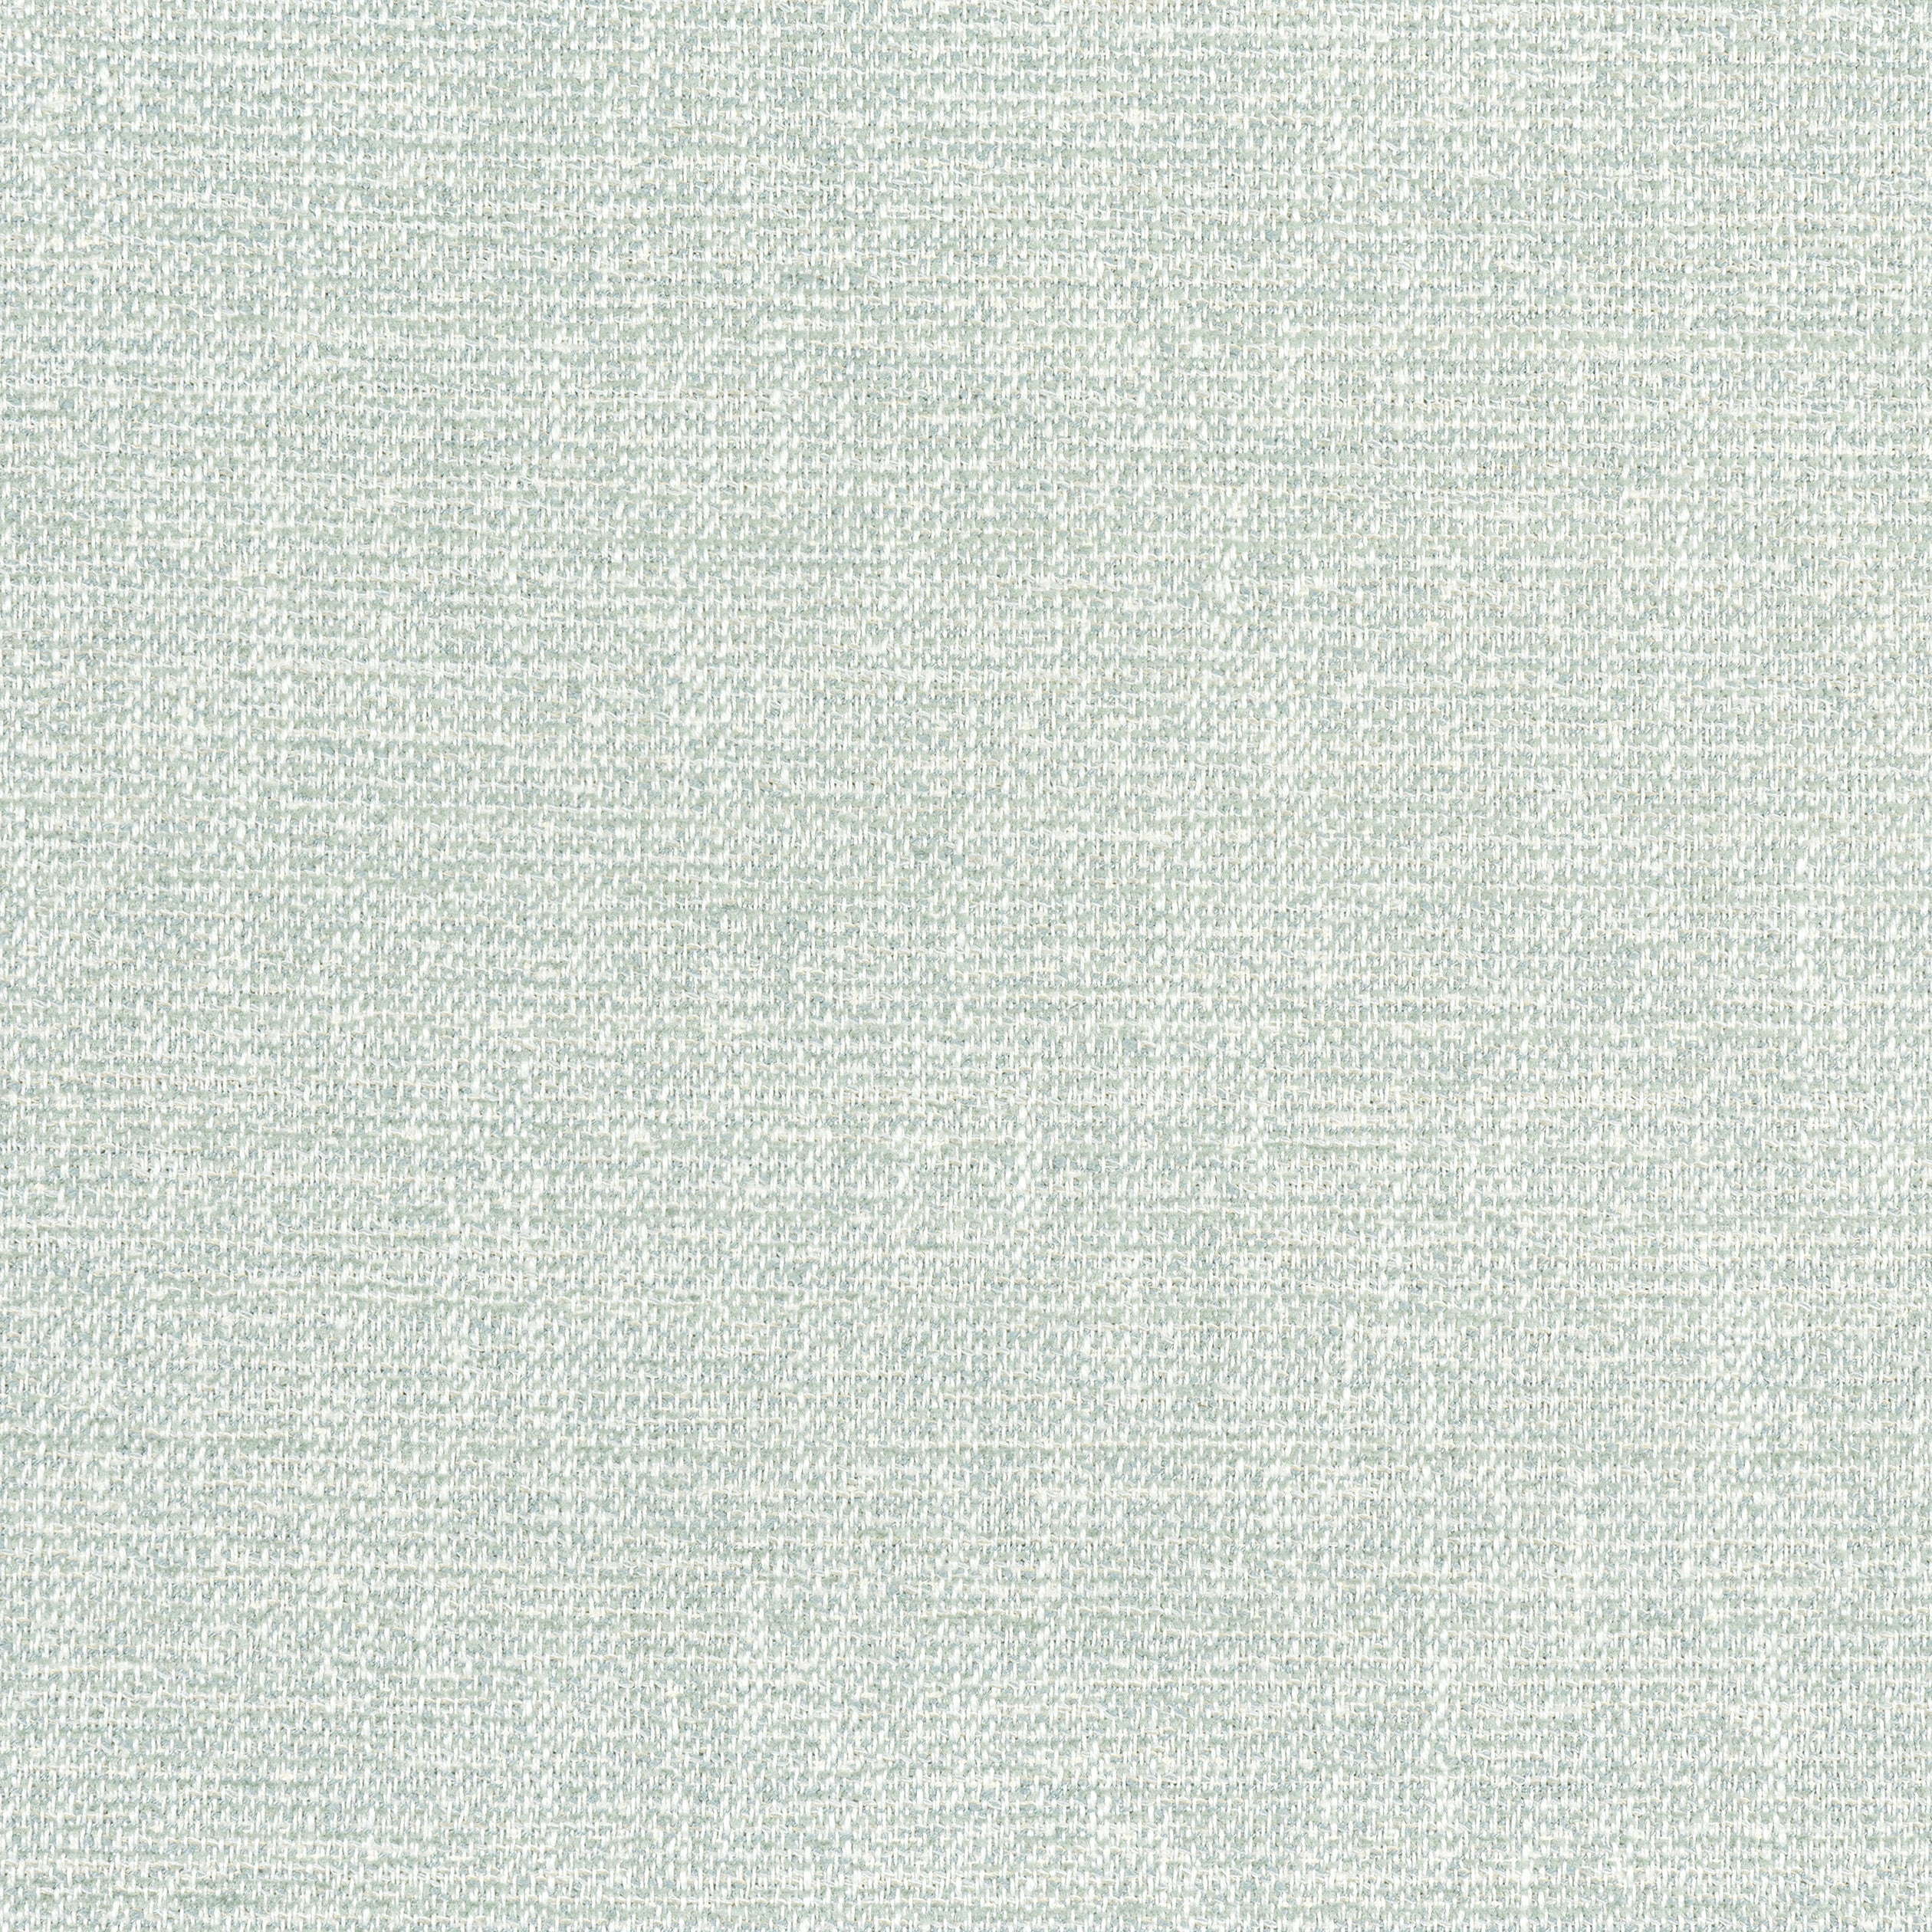 Calais fabric in mist color - pattern number W8789 - by Thibaut in the Haven Textures collection